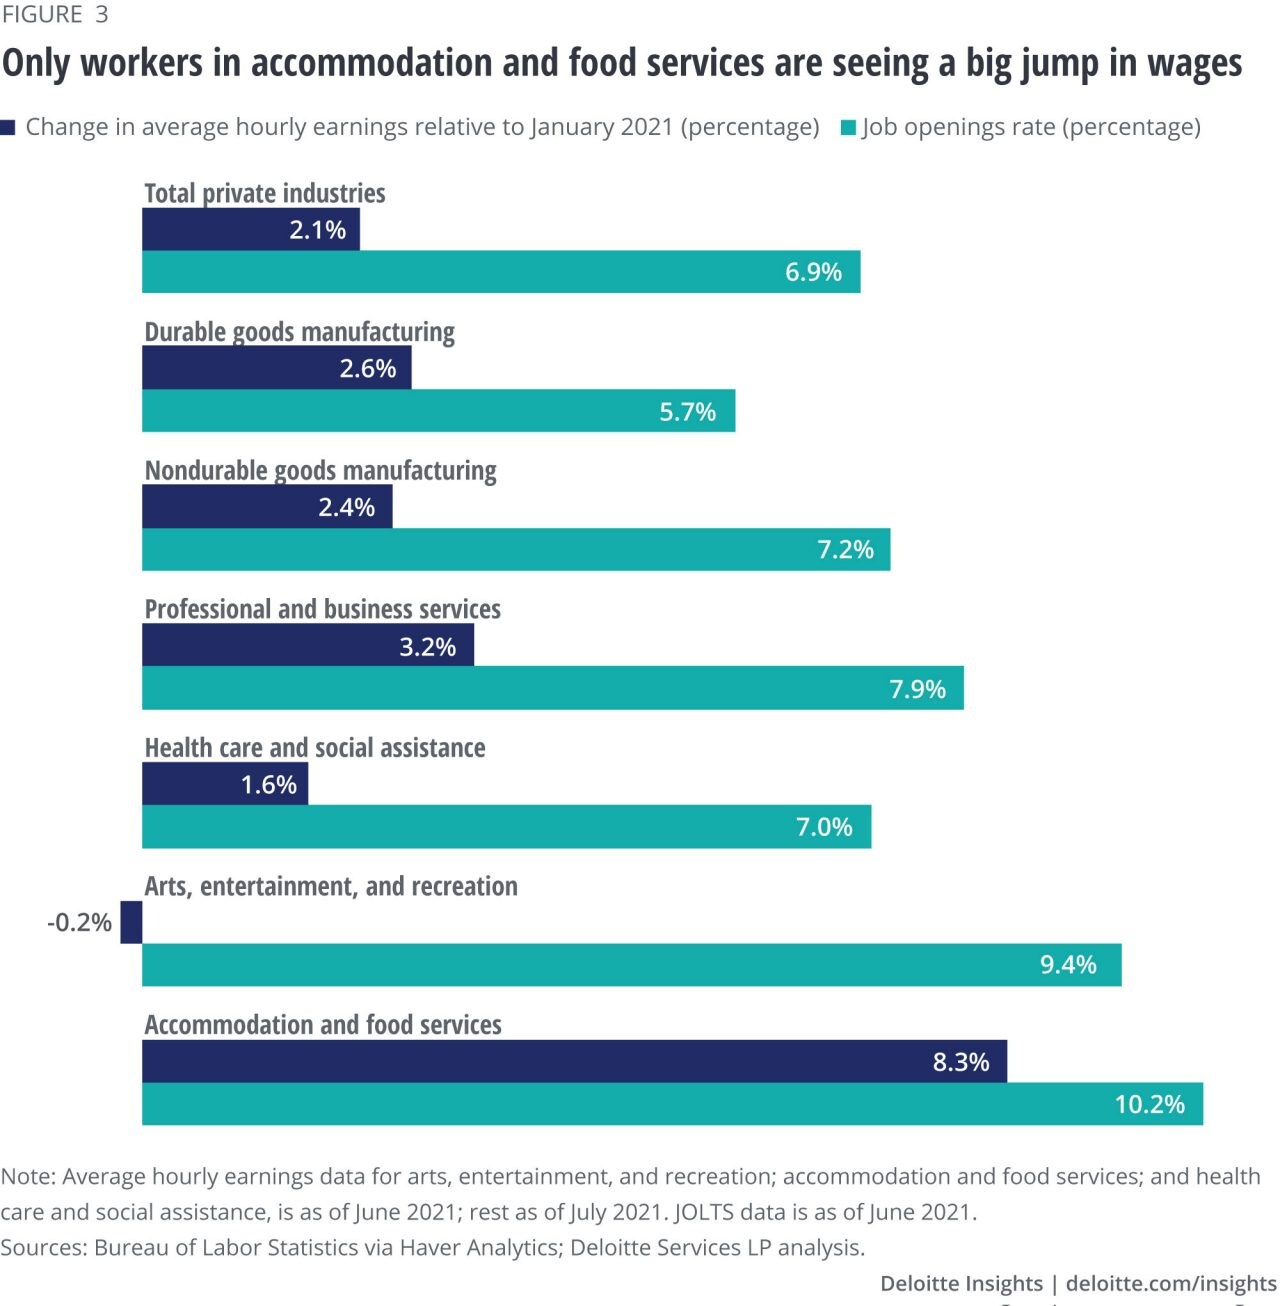 Figure 3. Only workers in Accommodation and food services are seeing a big jump in wages